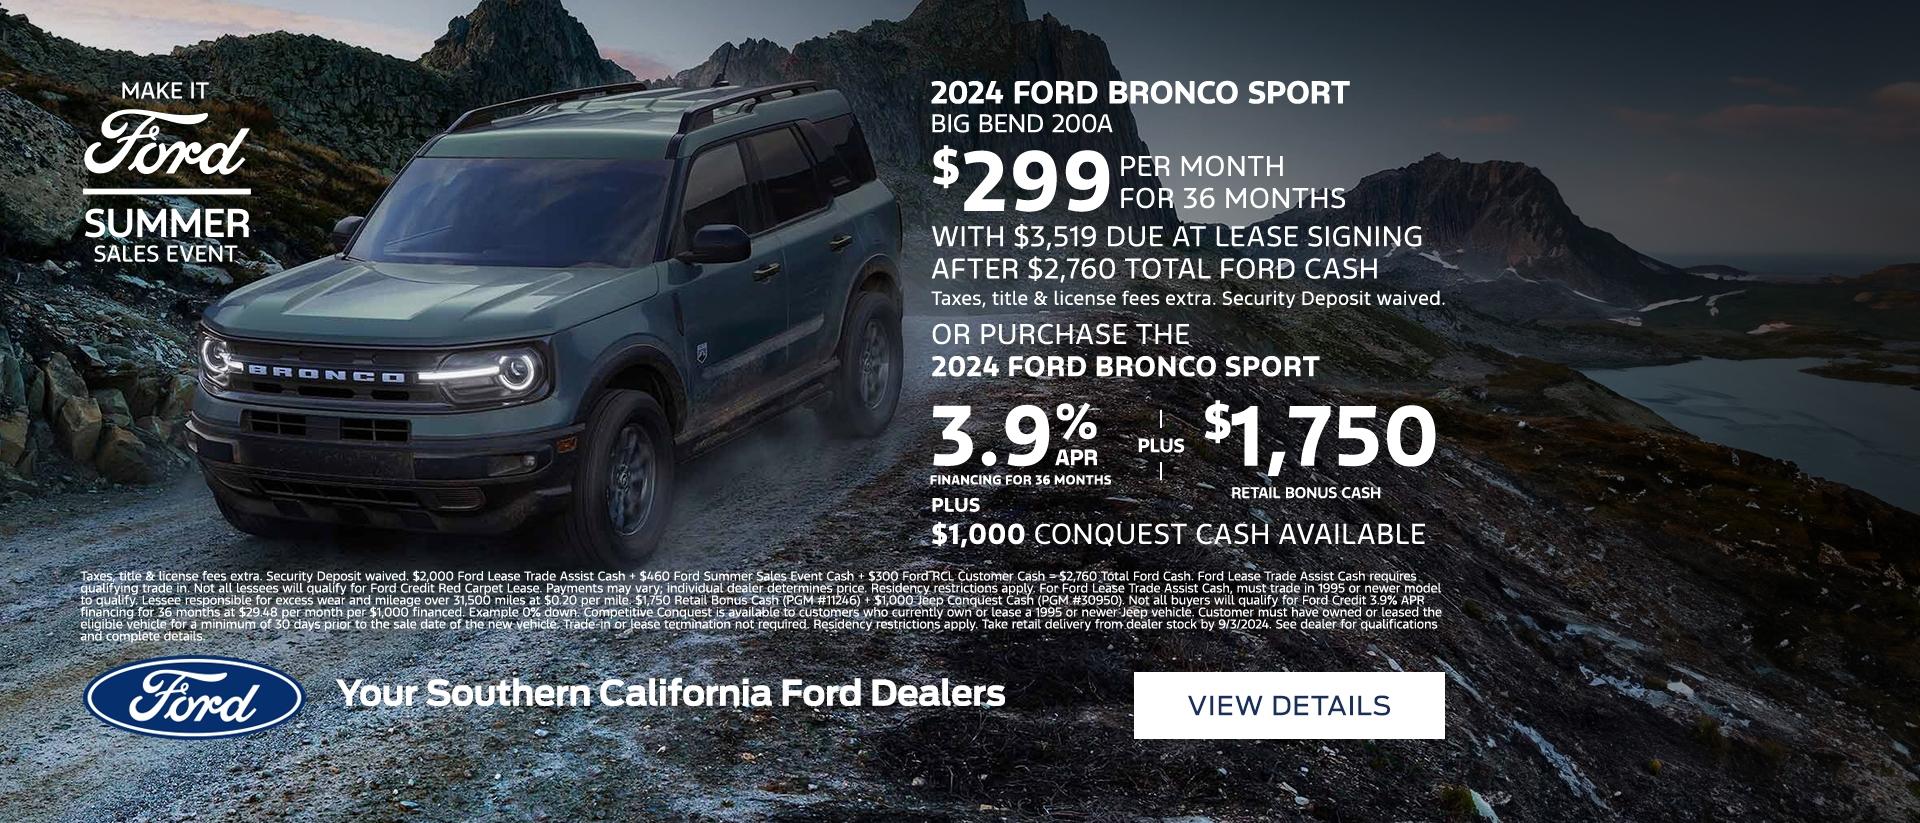 Make it Ford Summer Sales Event | Ford Bronco Sport Offers | Southern California Ford Dealers